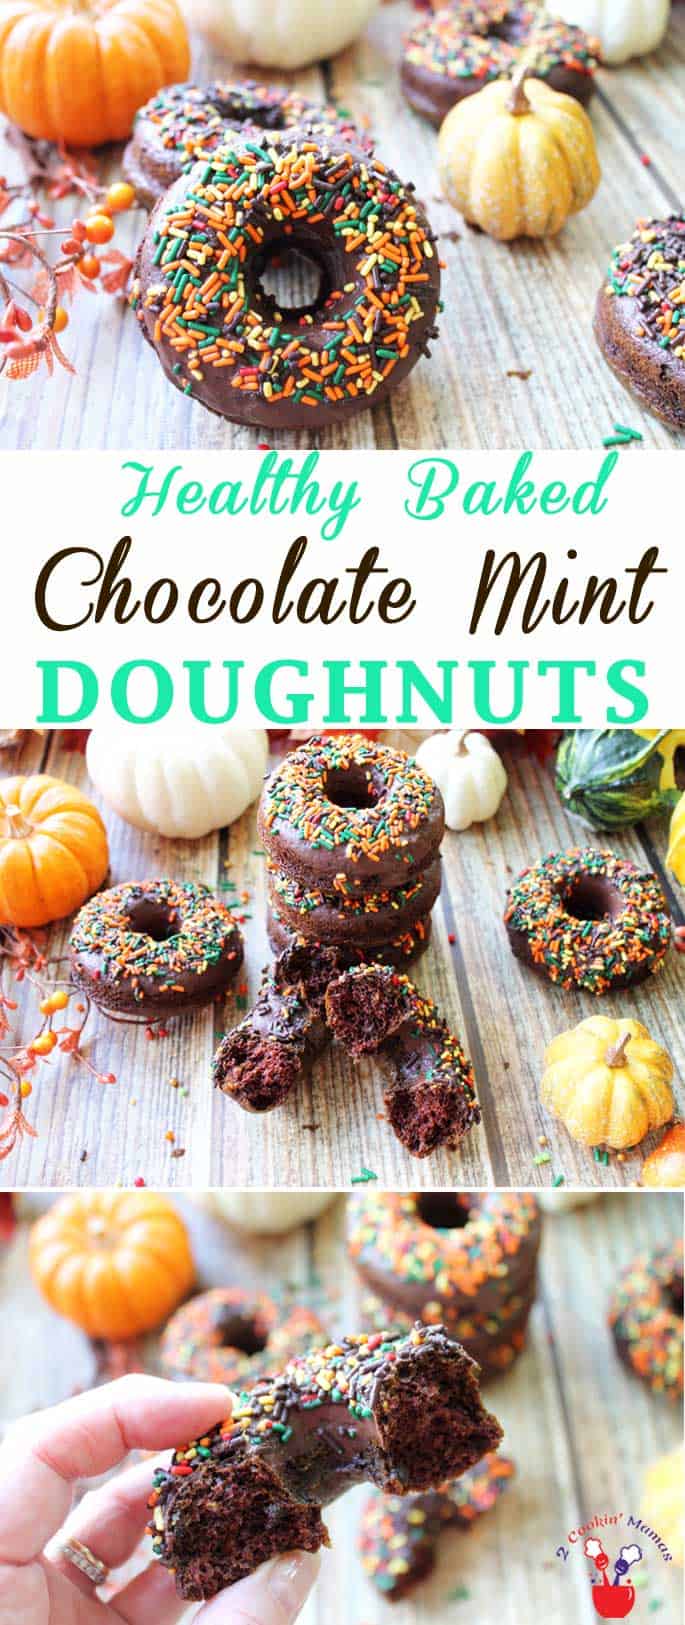 Chocolate Mint Doughnuts | 2 Cookin Mamas Our healthy, baked Chocolate Mint Doughnuts are rich, chocked full of chocolate, flavored with mint and, get this, pretty darn good for you! Of course, topped with a chocolate glaze and sprinkles just makes them even more irresistible! #recipe #healthy #doughnuts 